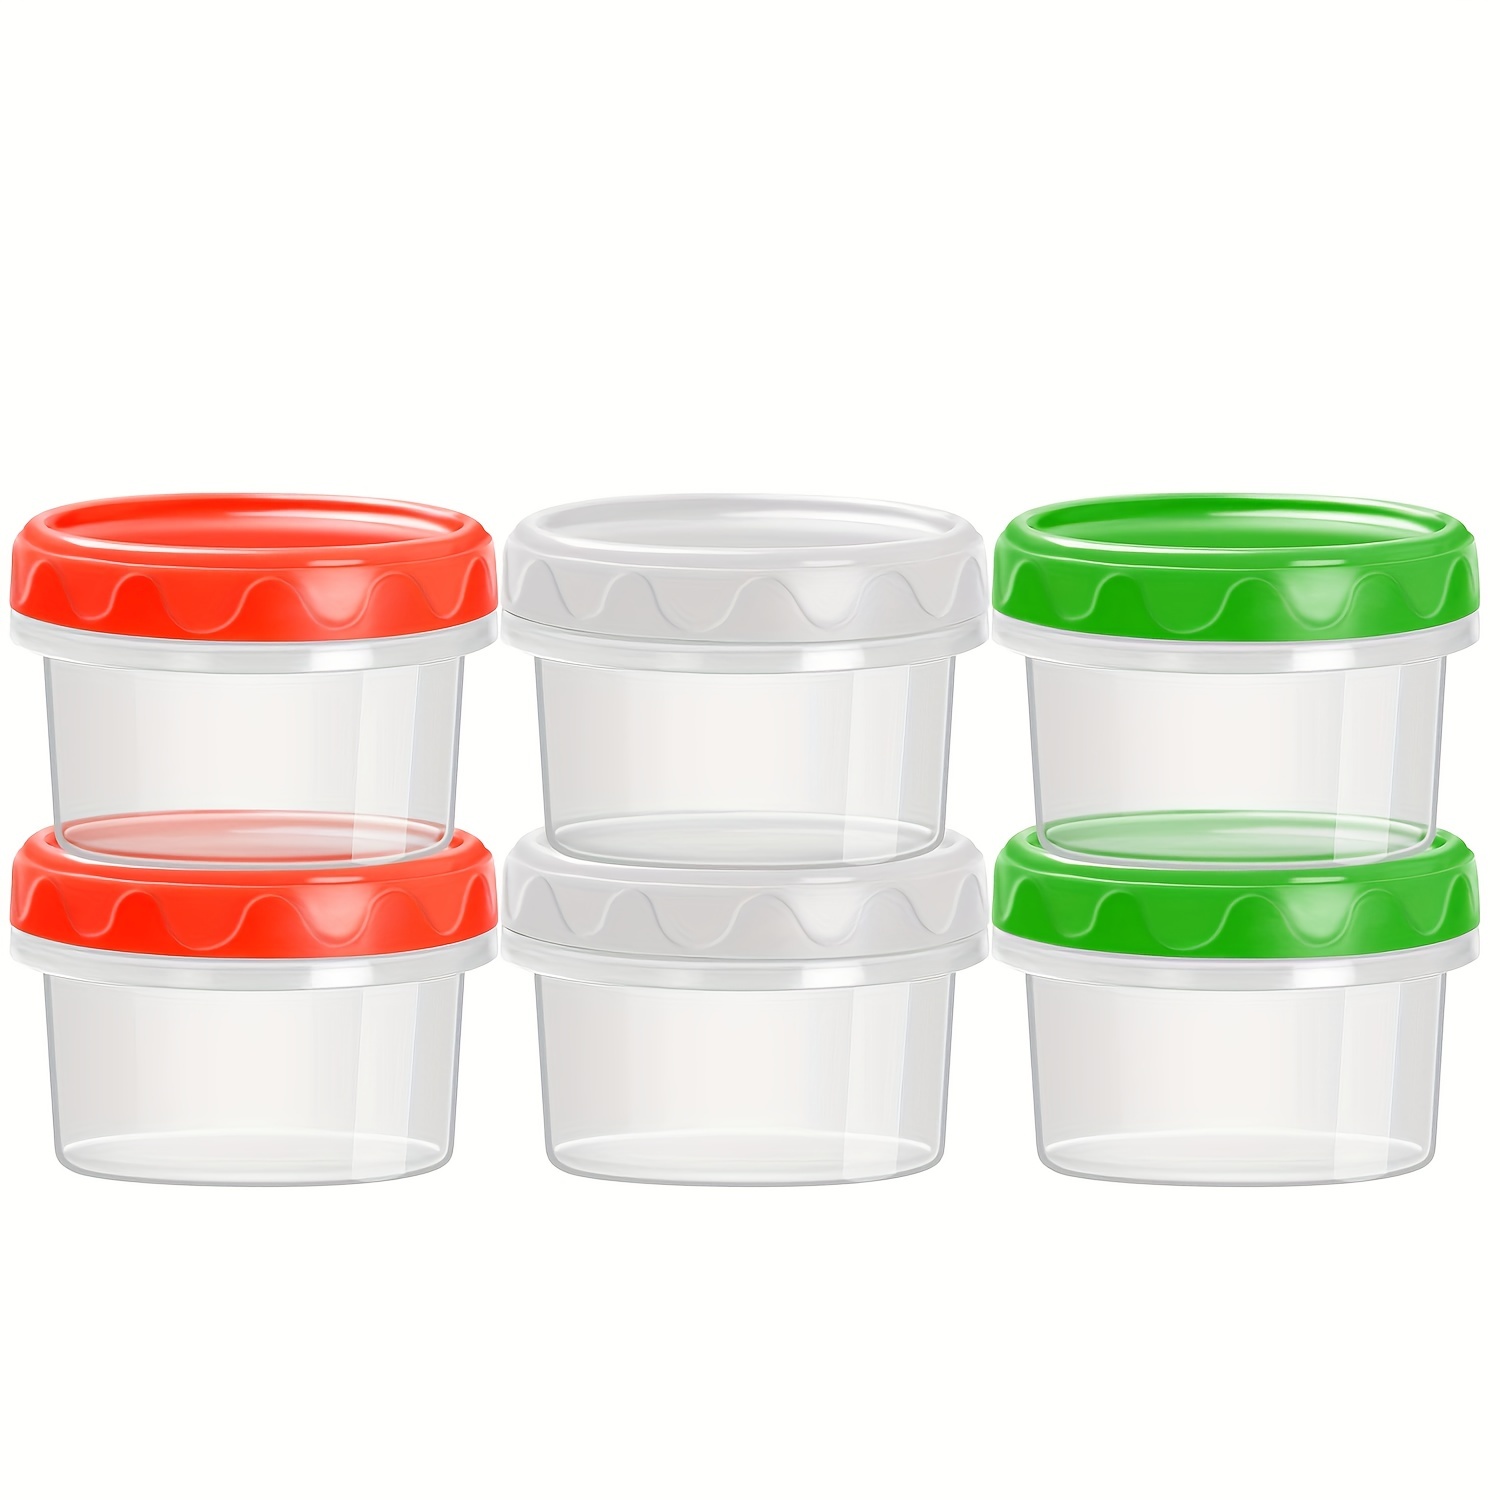 Reusable Small Plastic Containers With Screw Lids, Salad Dressing